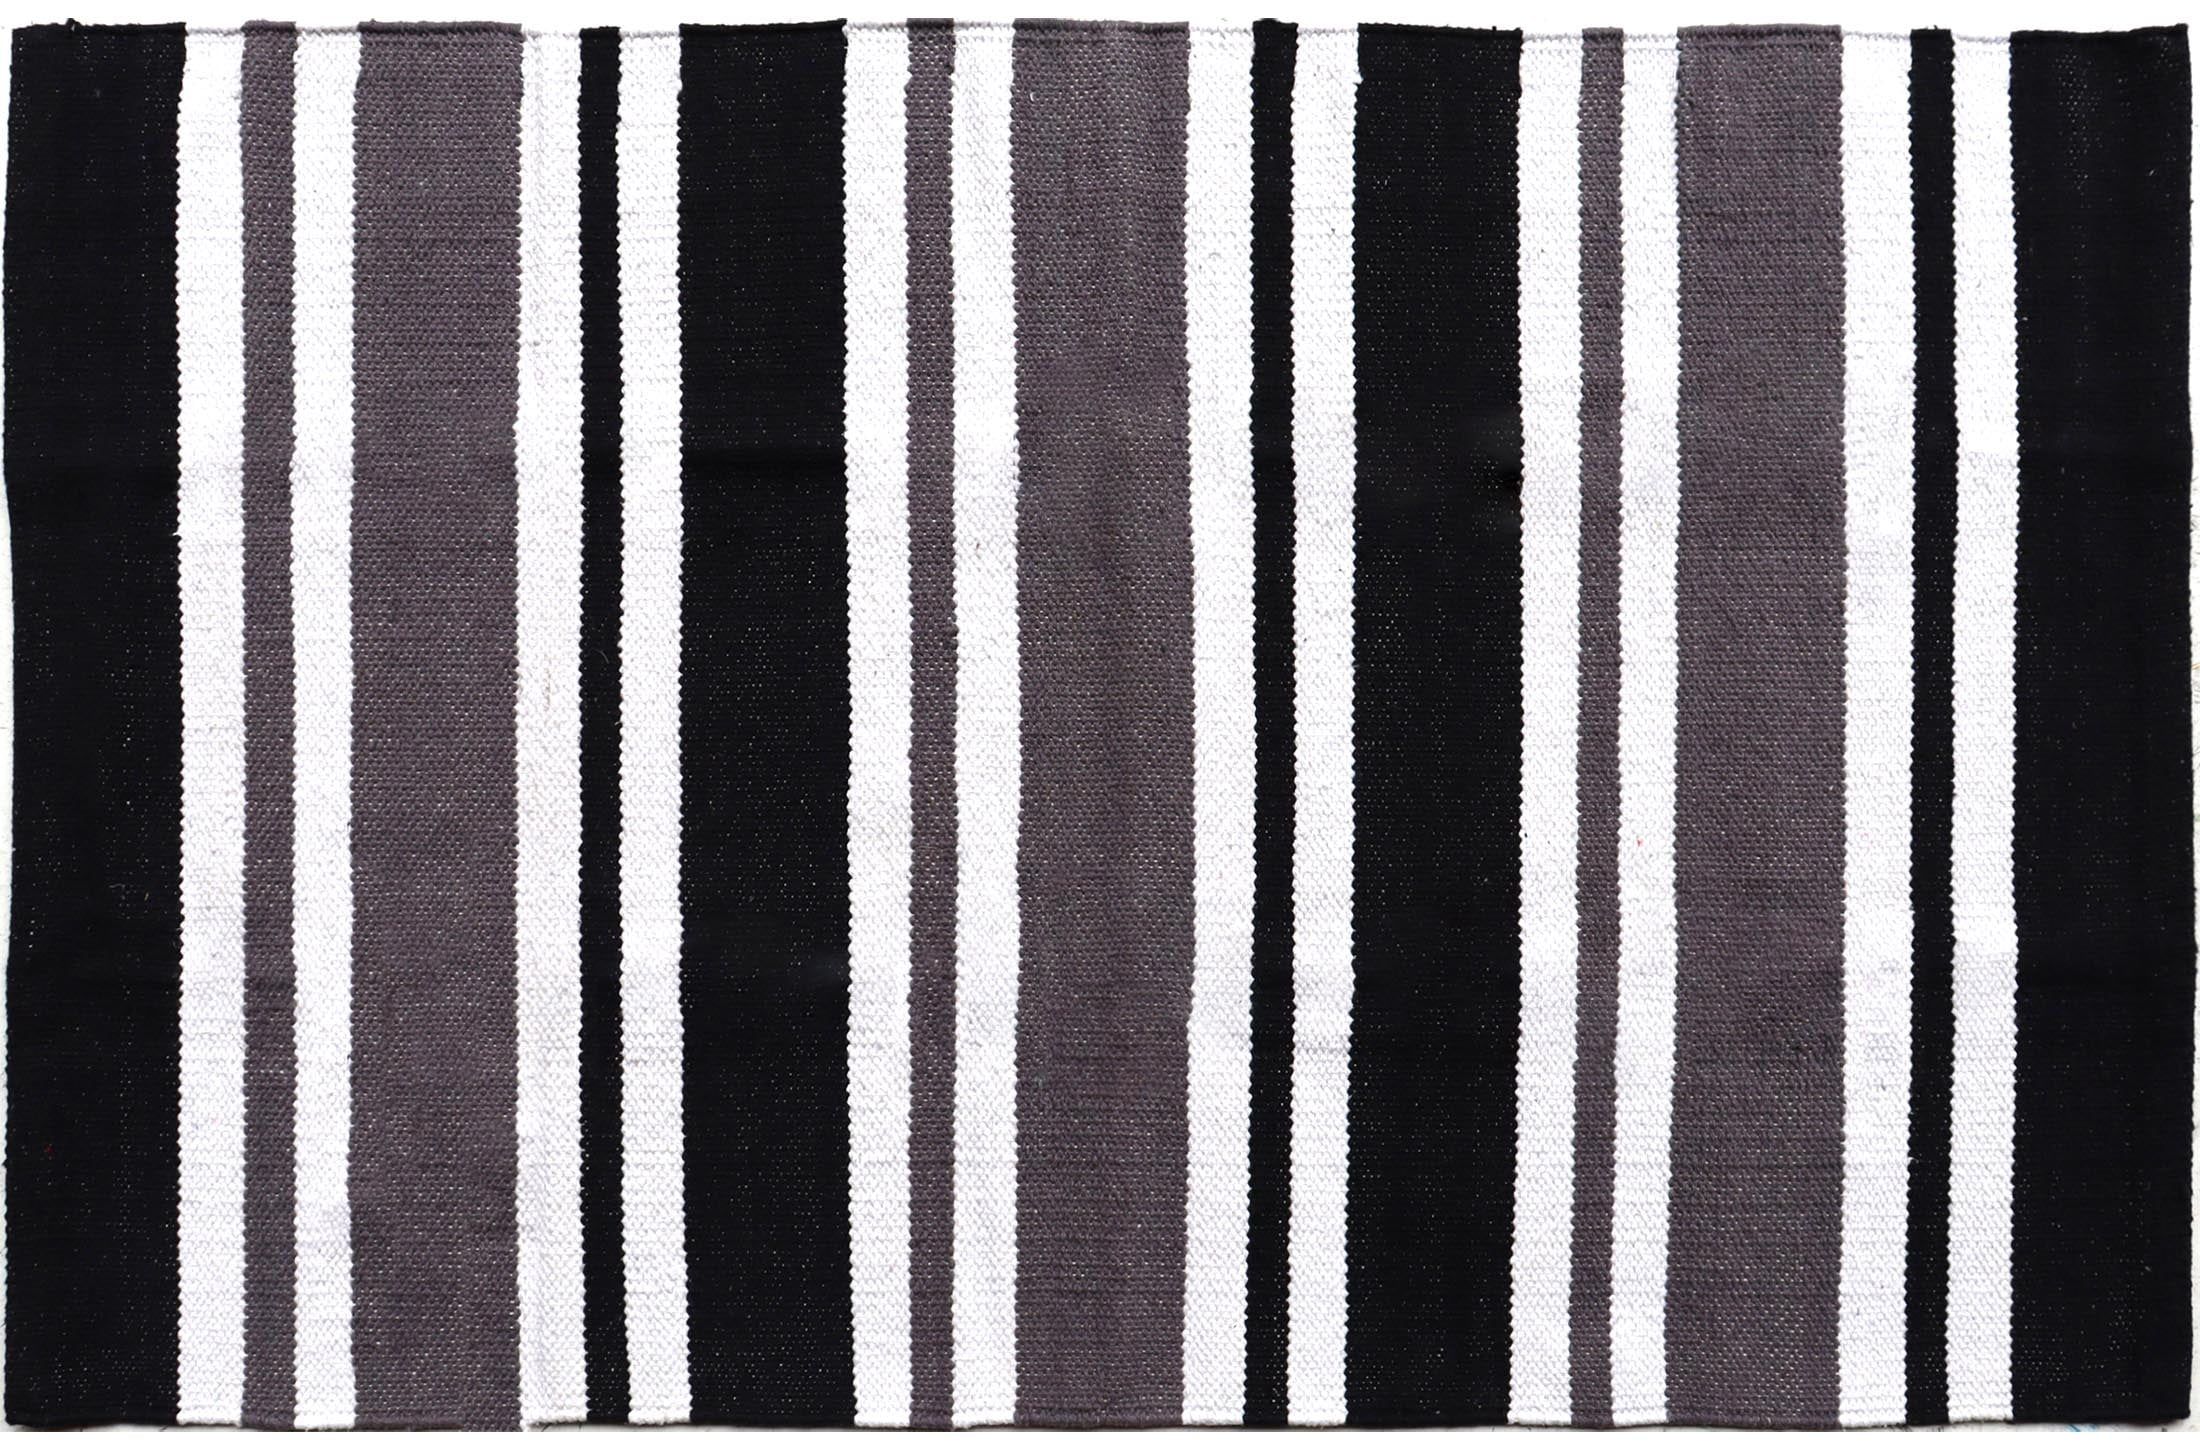 Halloween Stripe Black & White Outdoor Entryway Cotton Mat, 26 in x 38 in, by Way To Celebrate | Walmart (US)